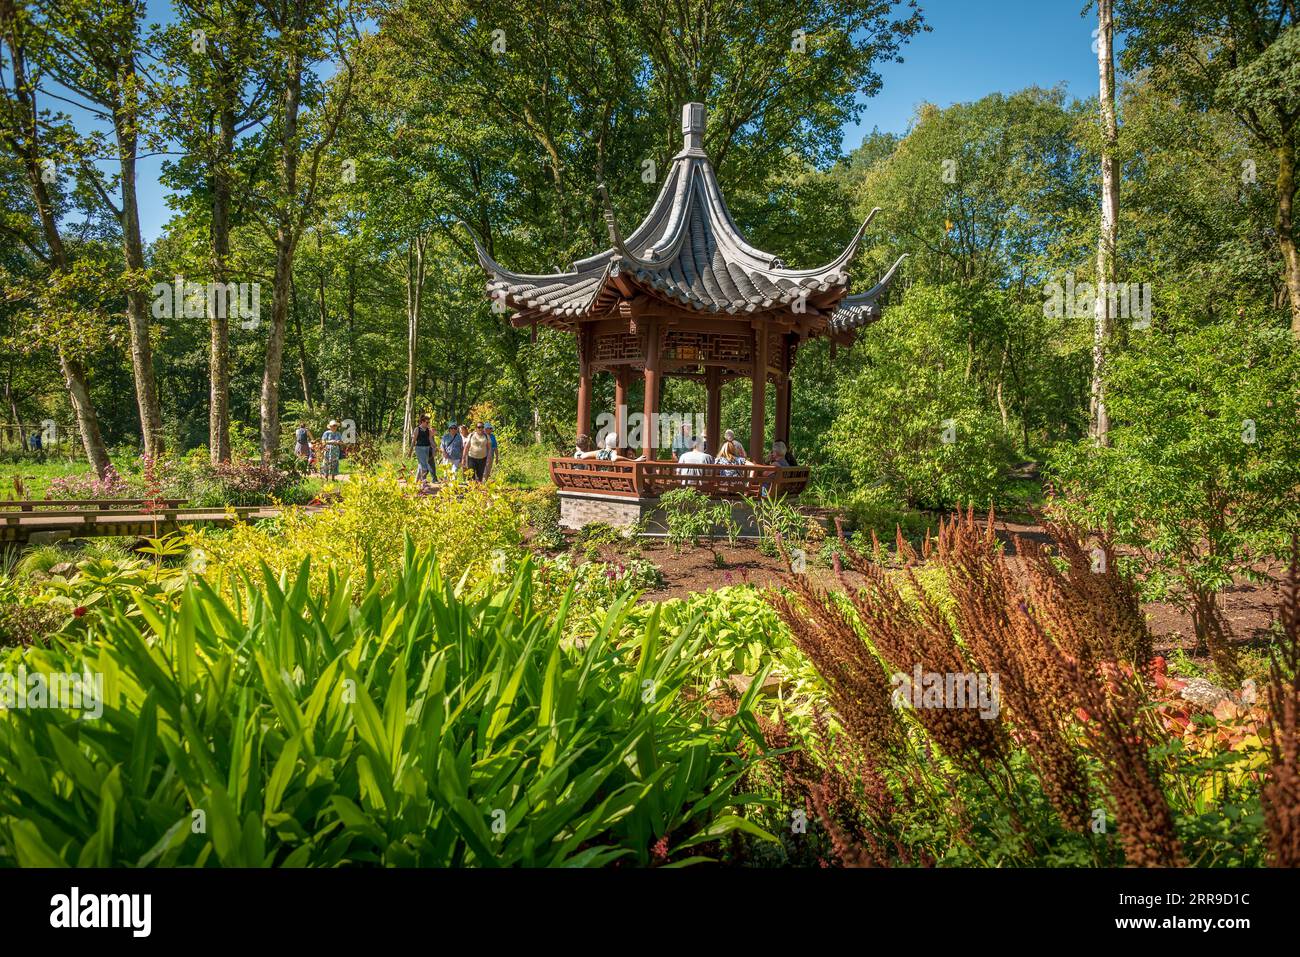 The Qing Yin music pavillion in Chinese Streamside Garden at RHS Bridgewater gardens in Worsley near Manchester. Stock Photo